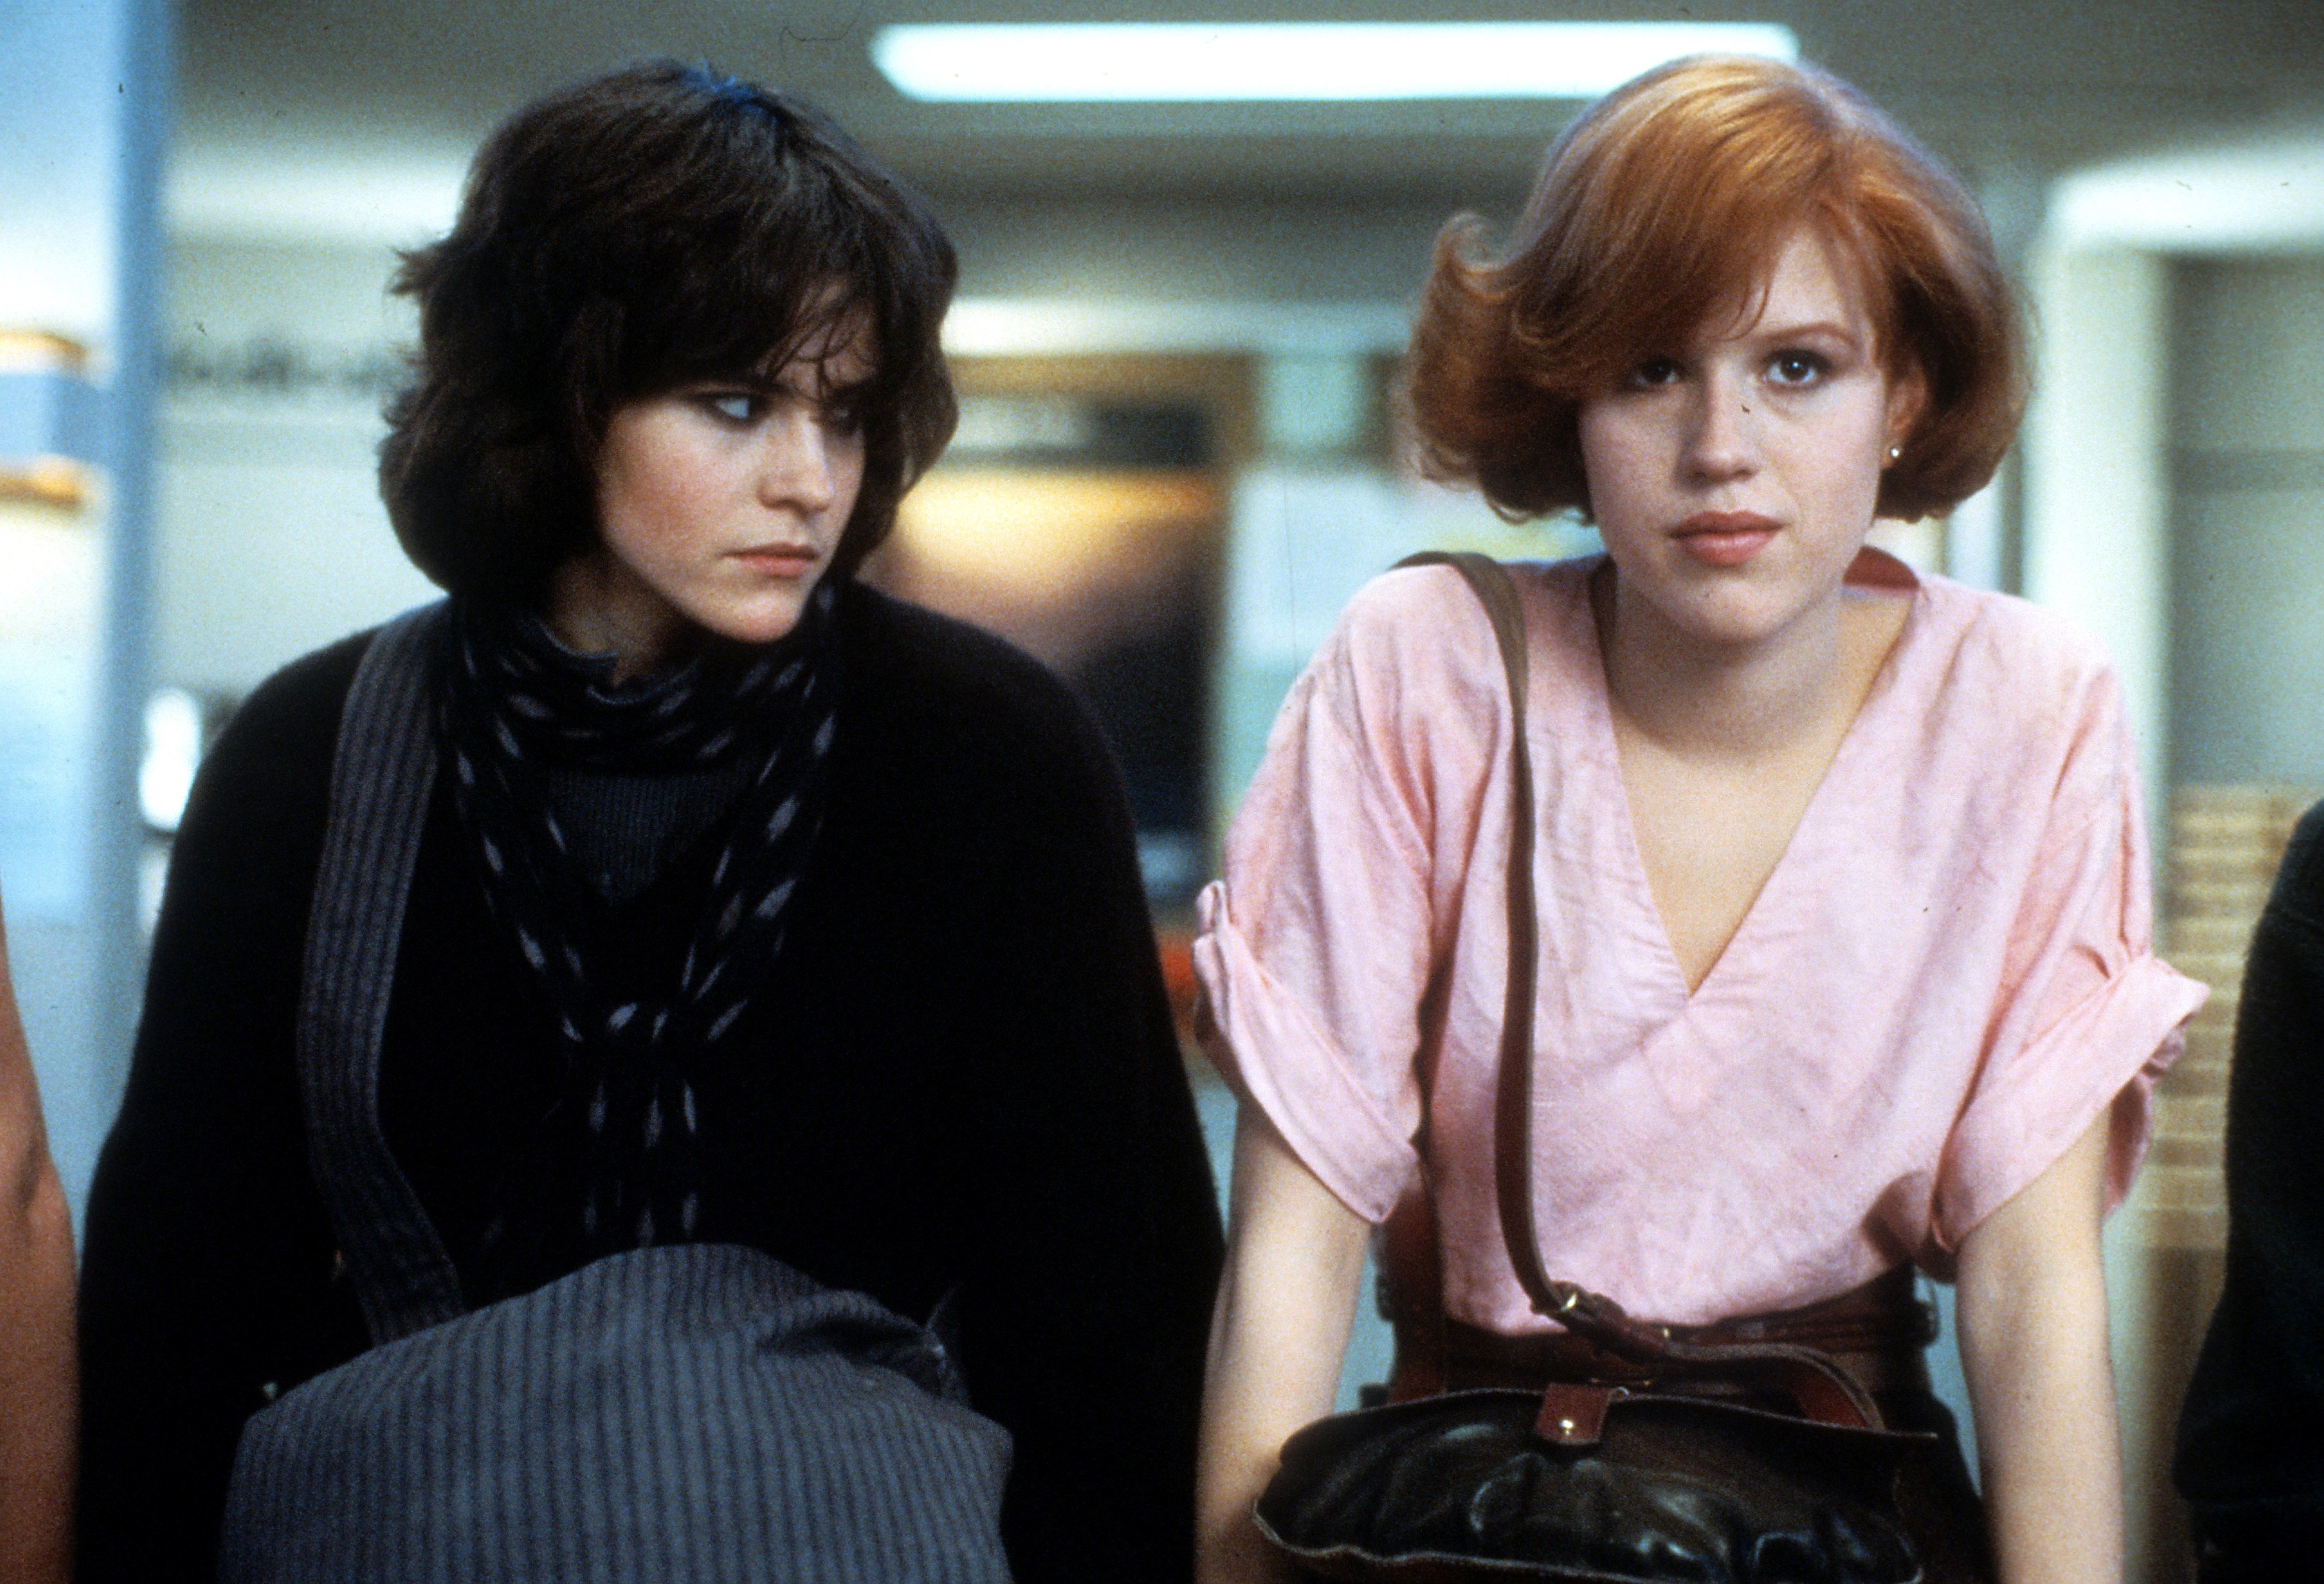 Ally Sheedy and Molly Ringwald in a scene from the film 'The Breakfast Club', 1985 | Source: Getty Images